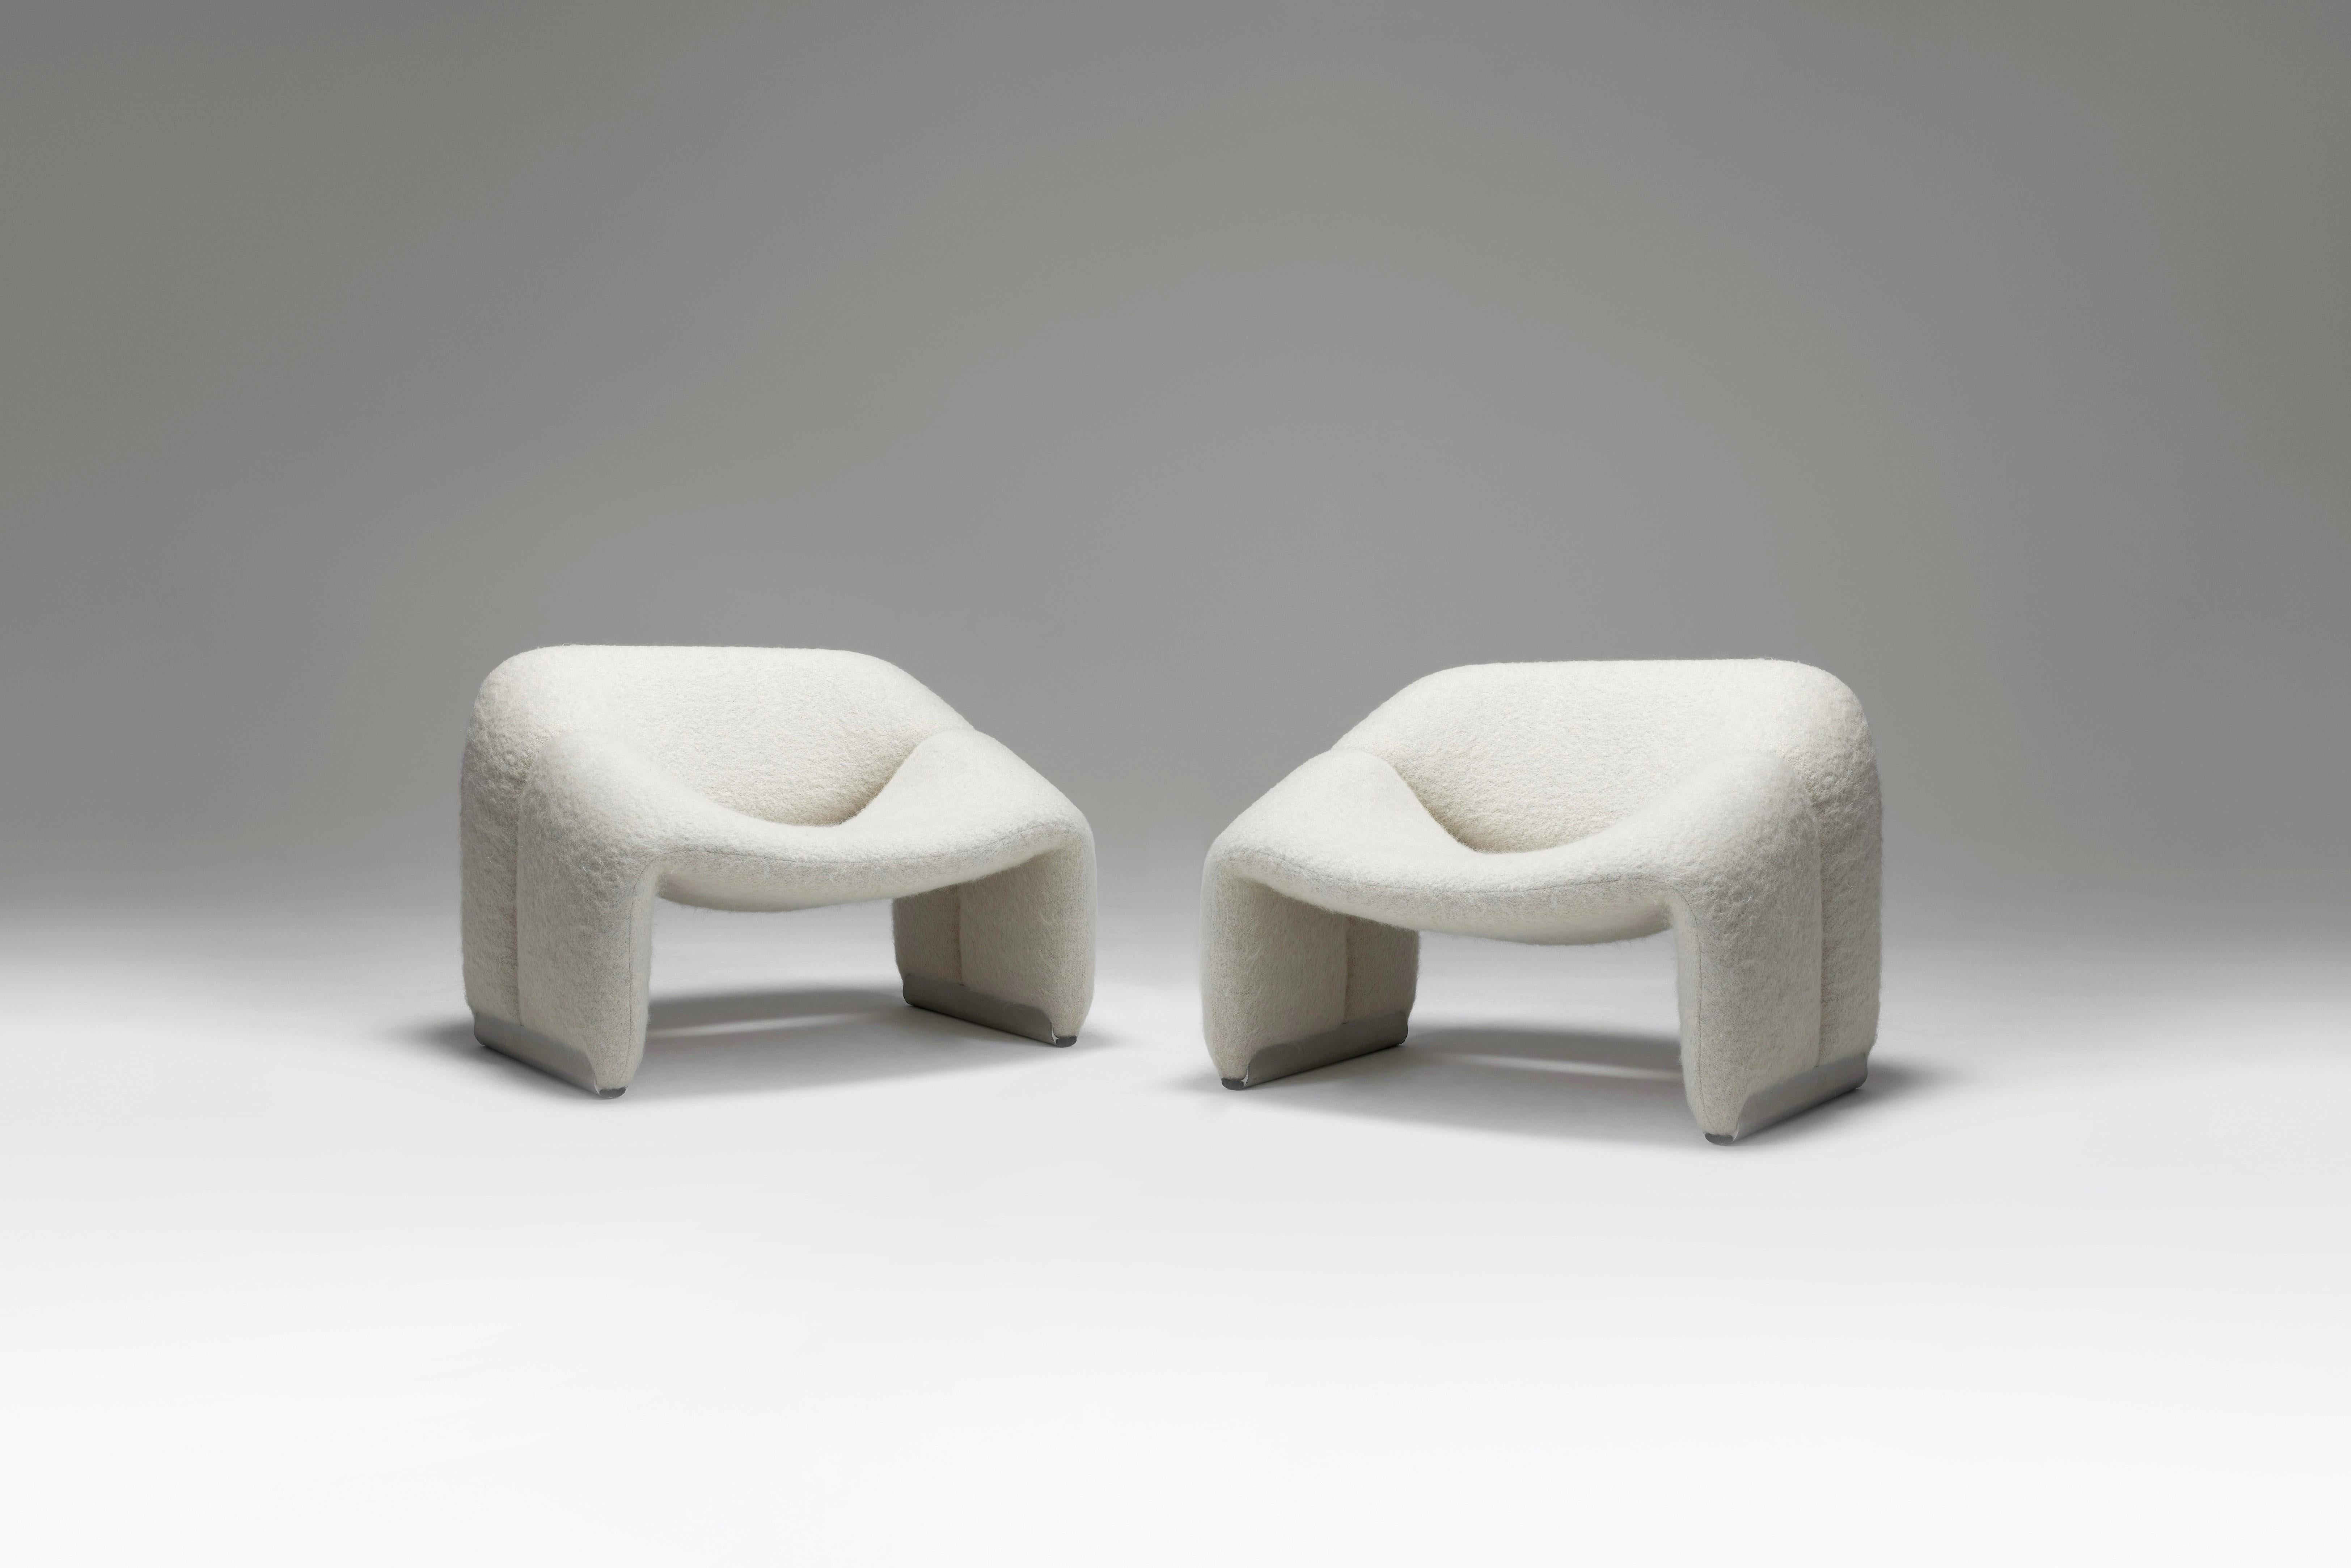 Fantastic pair of lounge chairs model F598, also called Groovy, by Pierre Paulin for Artifort, Netherlands 1972. This sculptural pair of armchairs has been recently reupholstered with lovely and high quality Pierre Frey wool and alpaca blend fabric